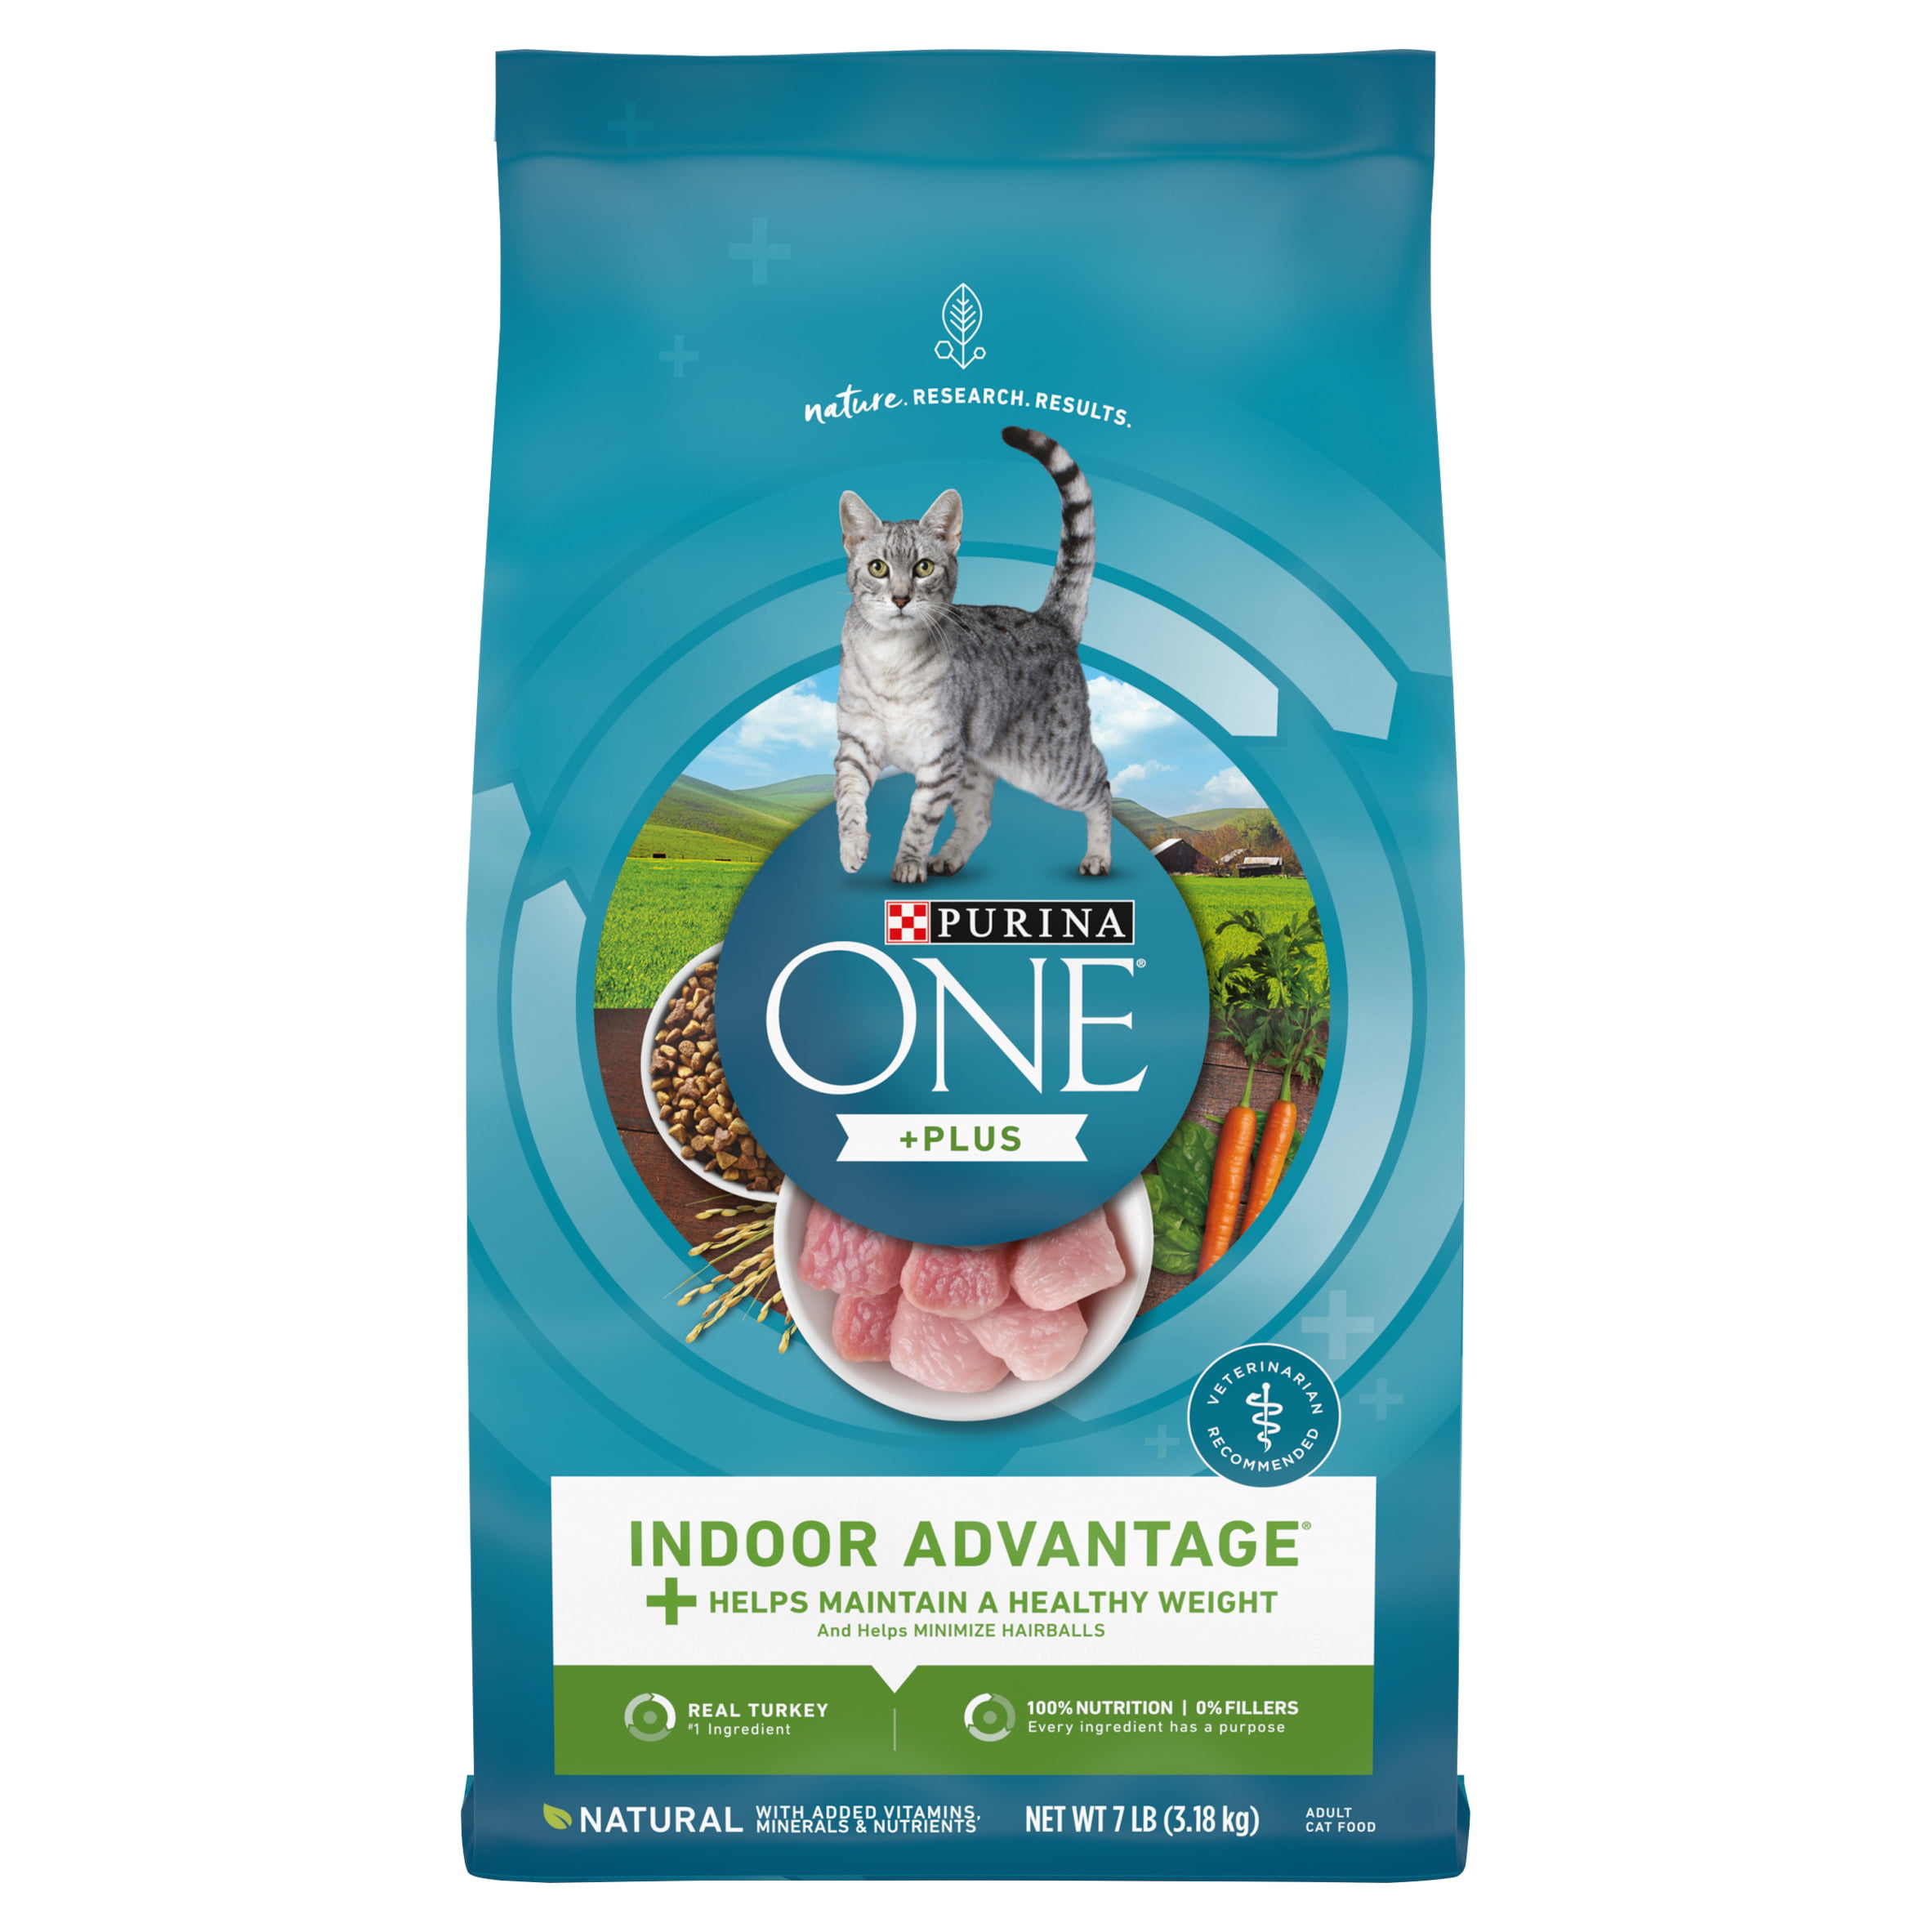 Purina ONE Natural, Low Fat, Weight Control, Indoor Dry Cat Food, +Plus